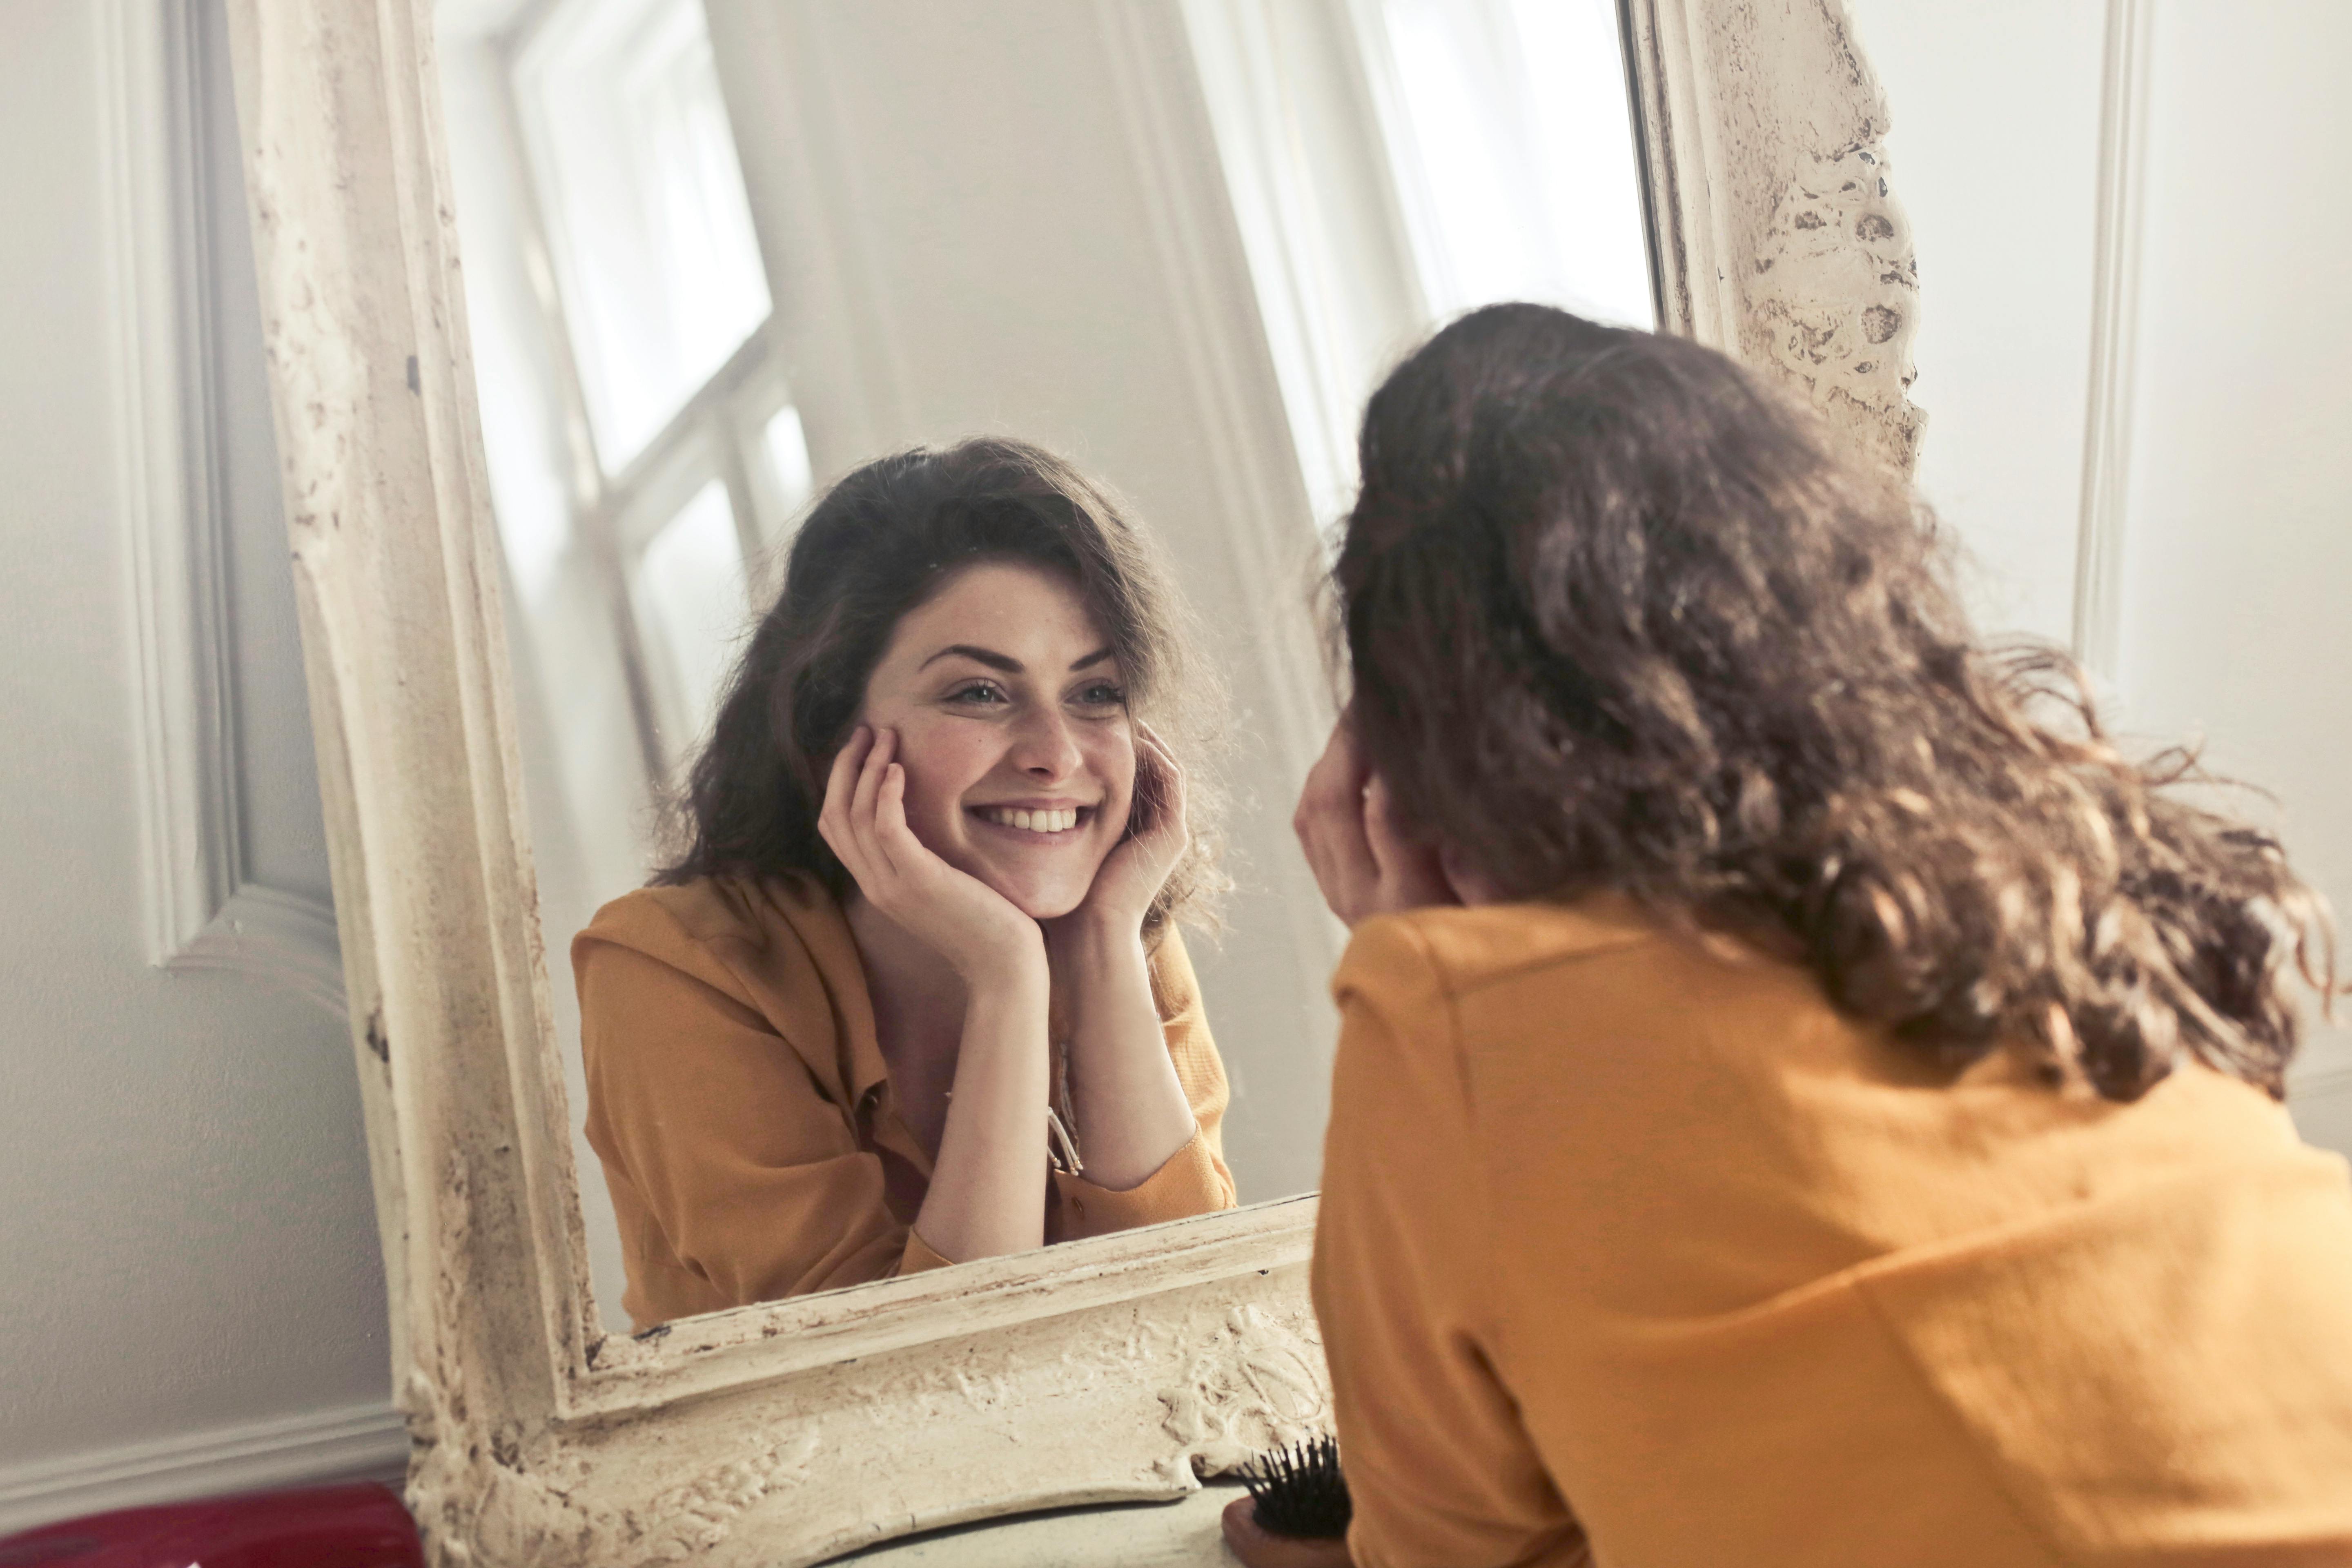 A happy woman smiling at her reflection in a mirror | Source: Pexels